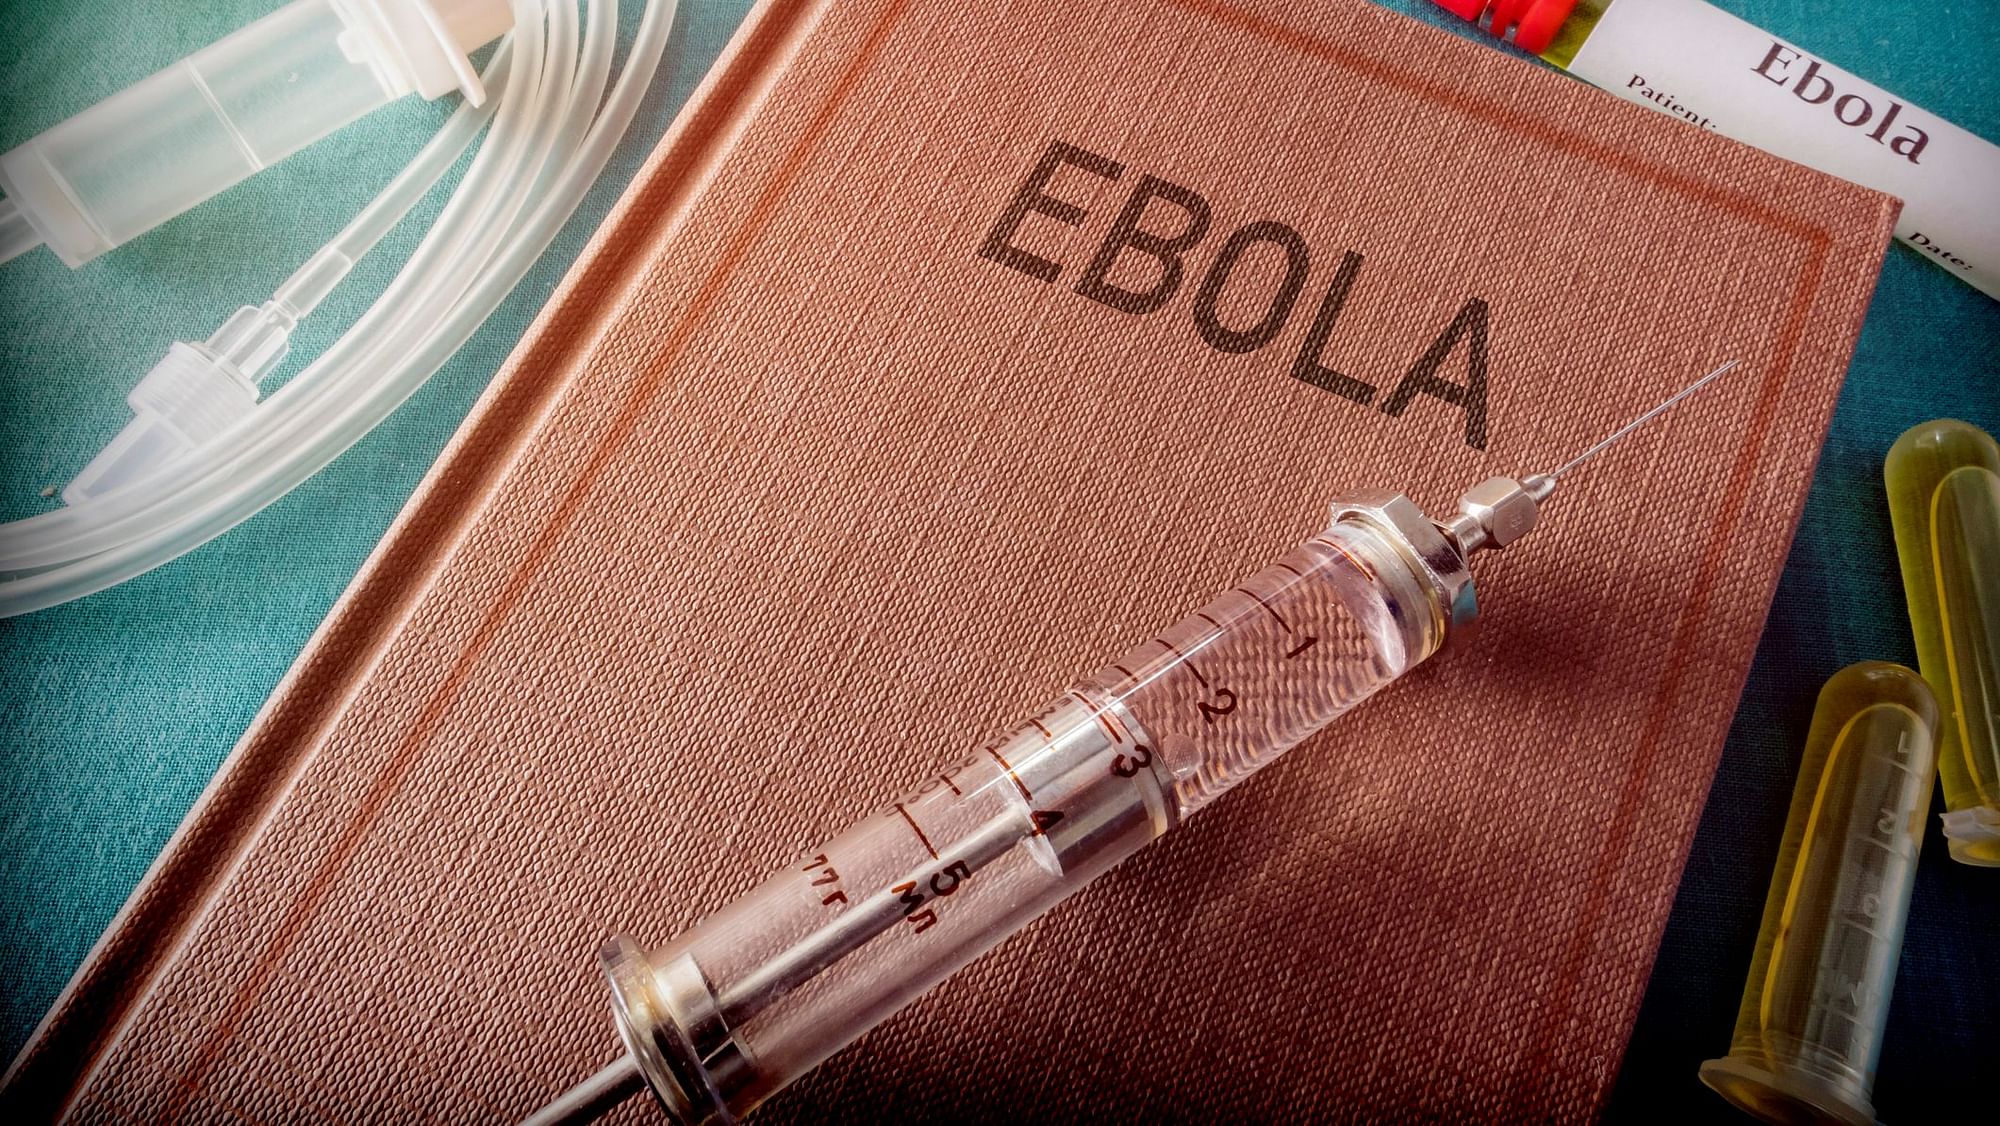 The Democratic Republic of Congo authorities on March 29, indicated fresh cases of Ebola contamination in two localities as they battle an epidemic that has killed 652 to date.